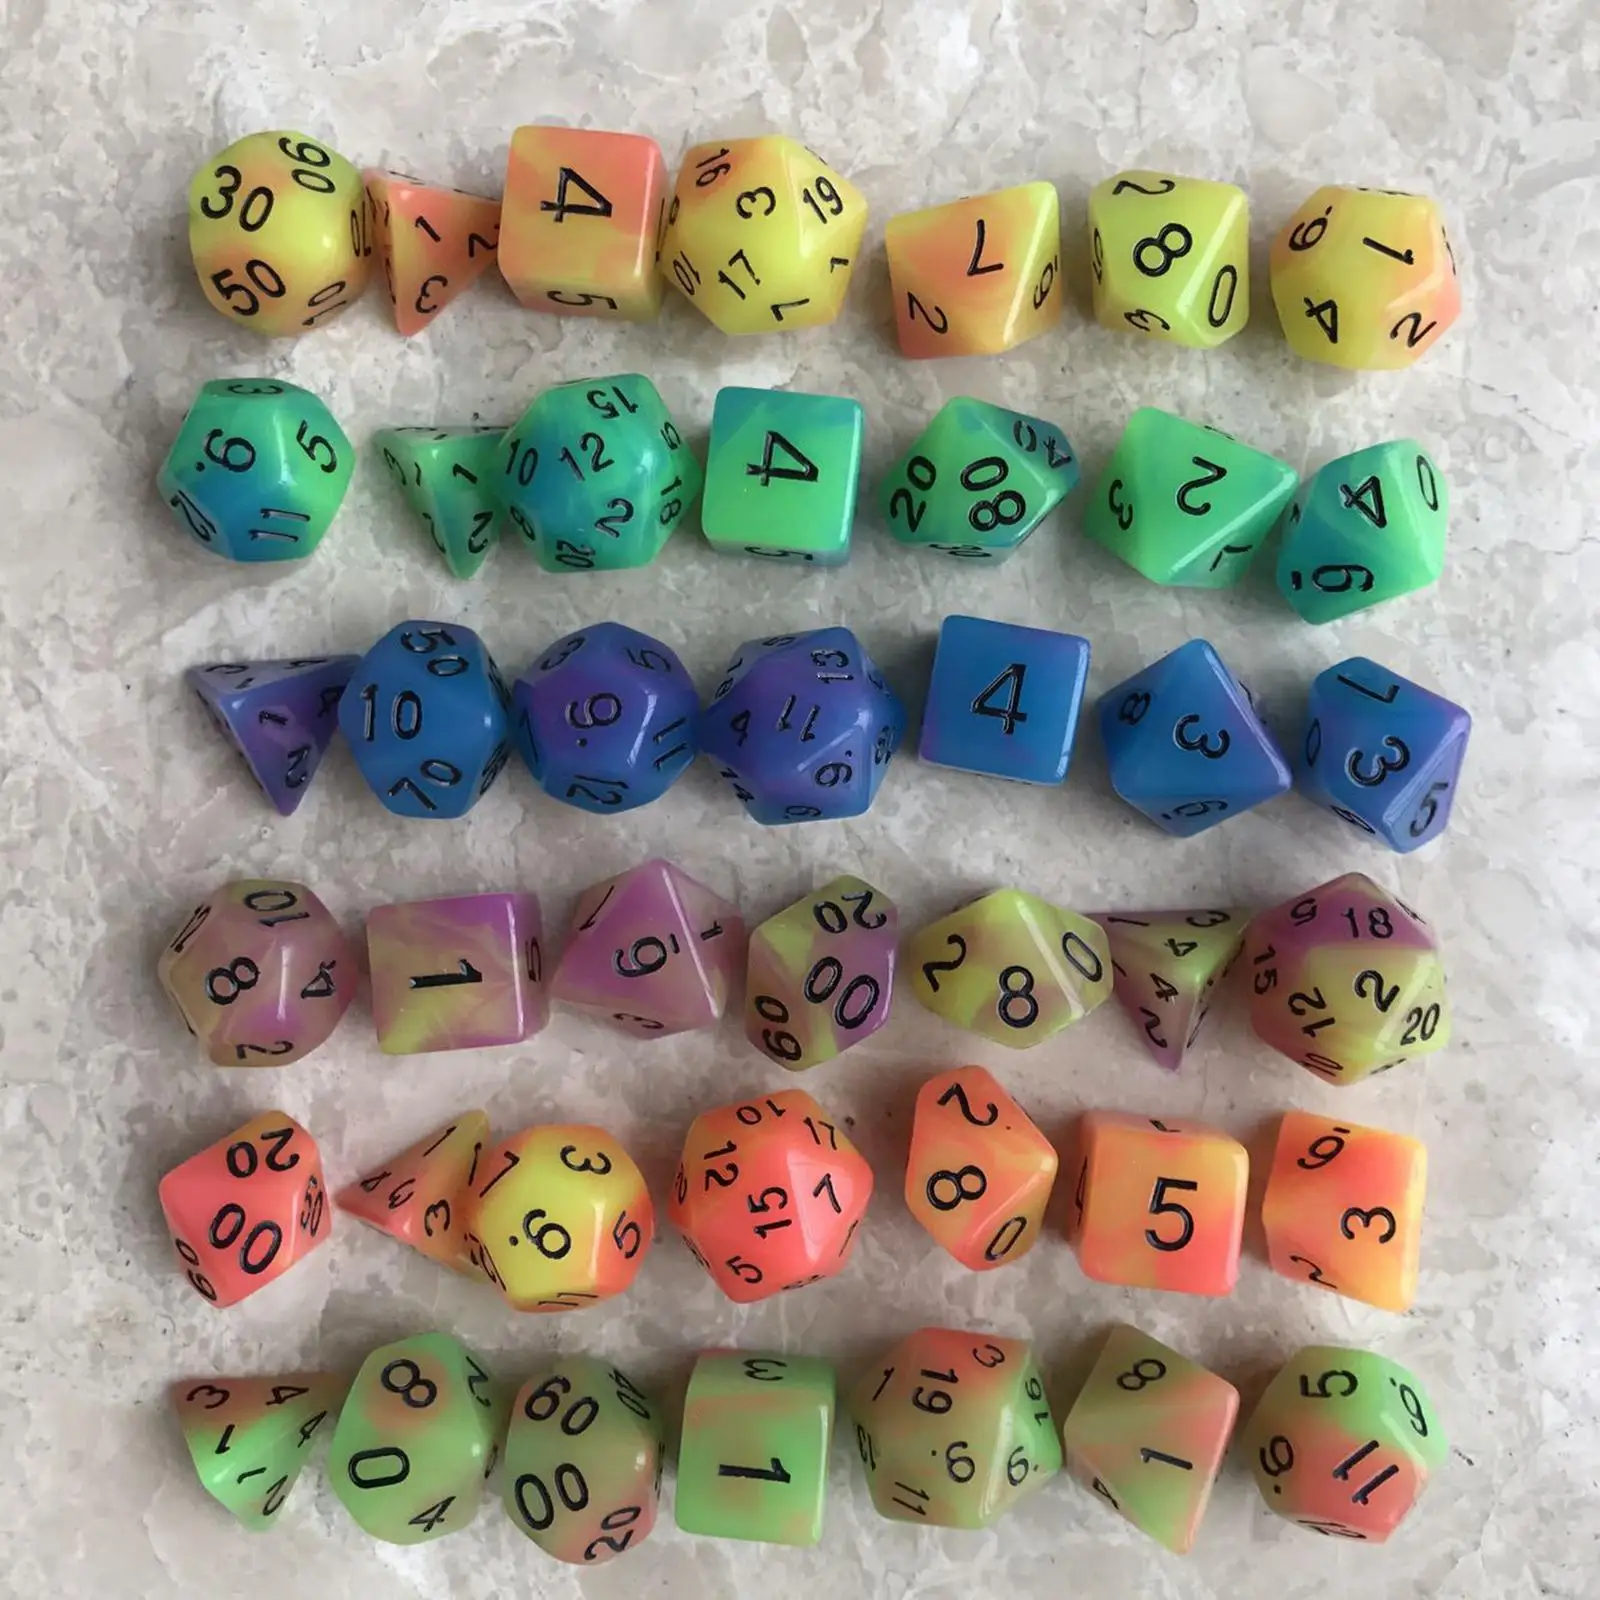 Luminous RPG Dices Set Toys D4-D20 with Pouch for MTG RPG Role Playing Table Games